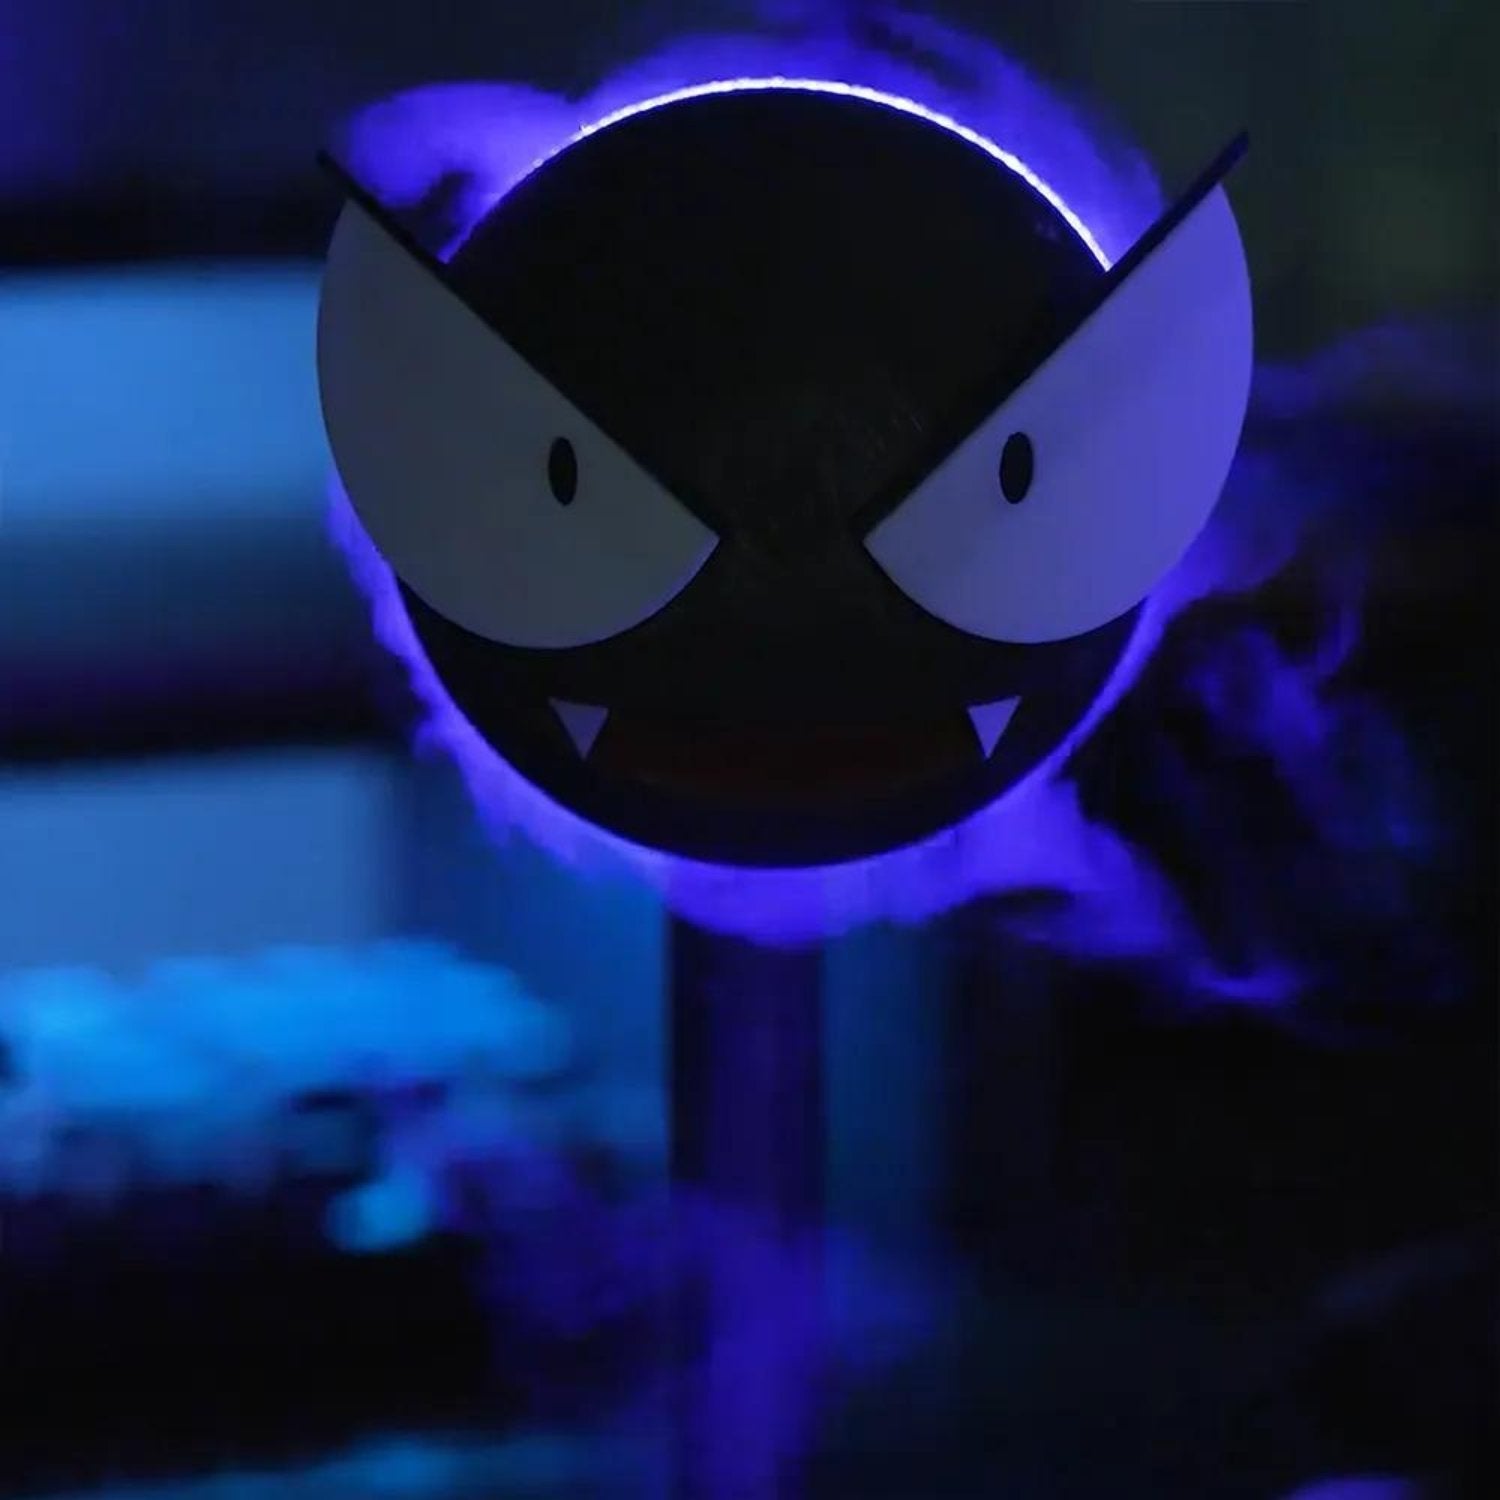 Gastly Humidifier™ - Gastly Humidifier